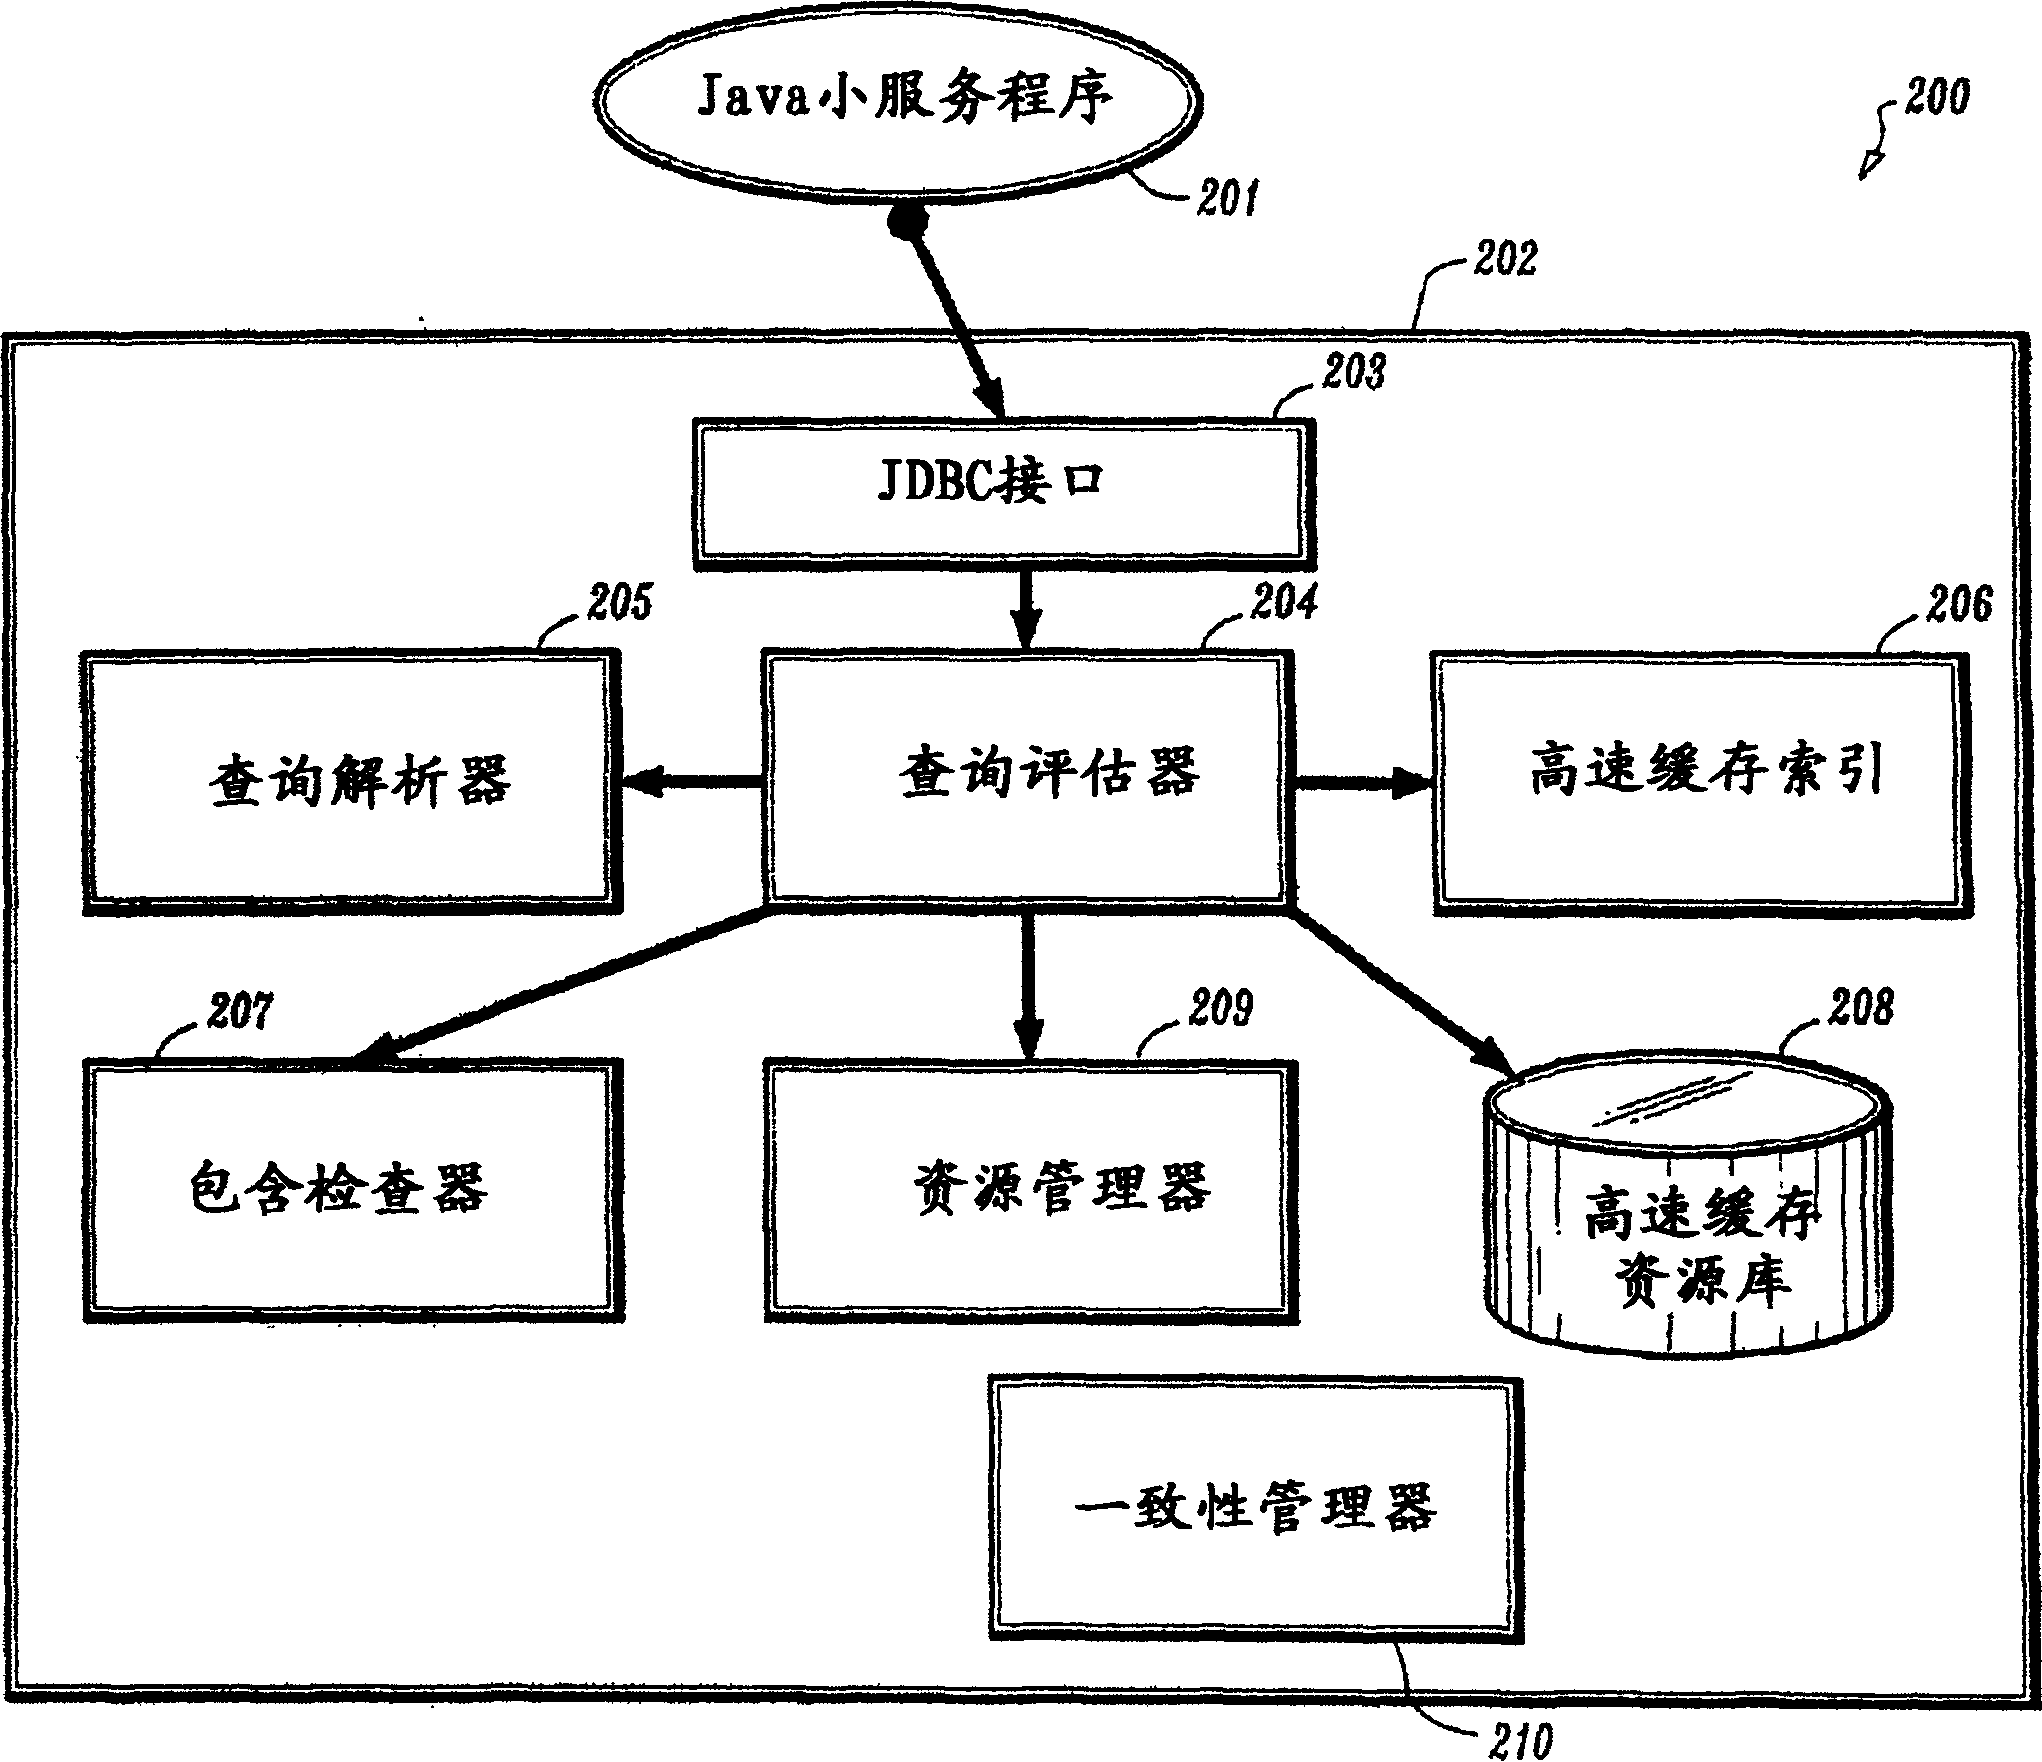 A transparent edge-of-network data cache